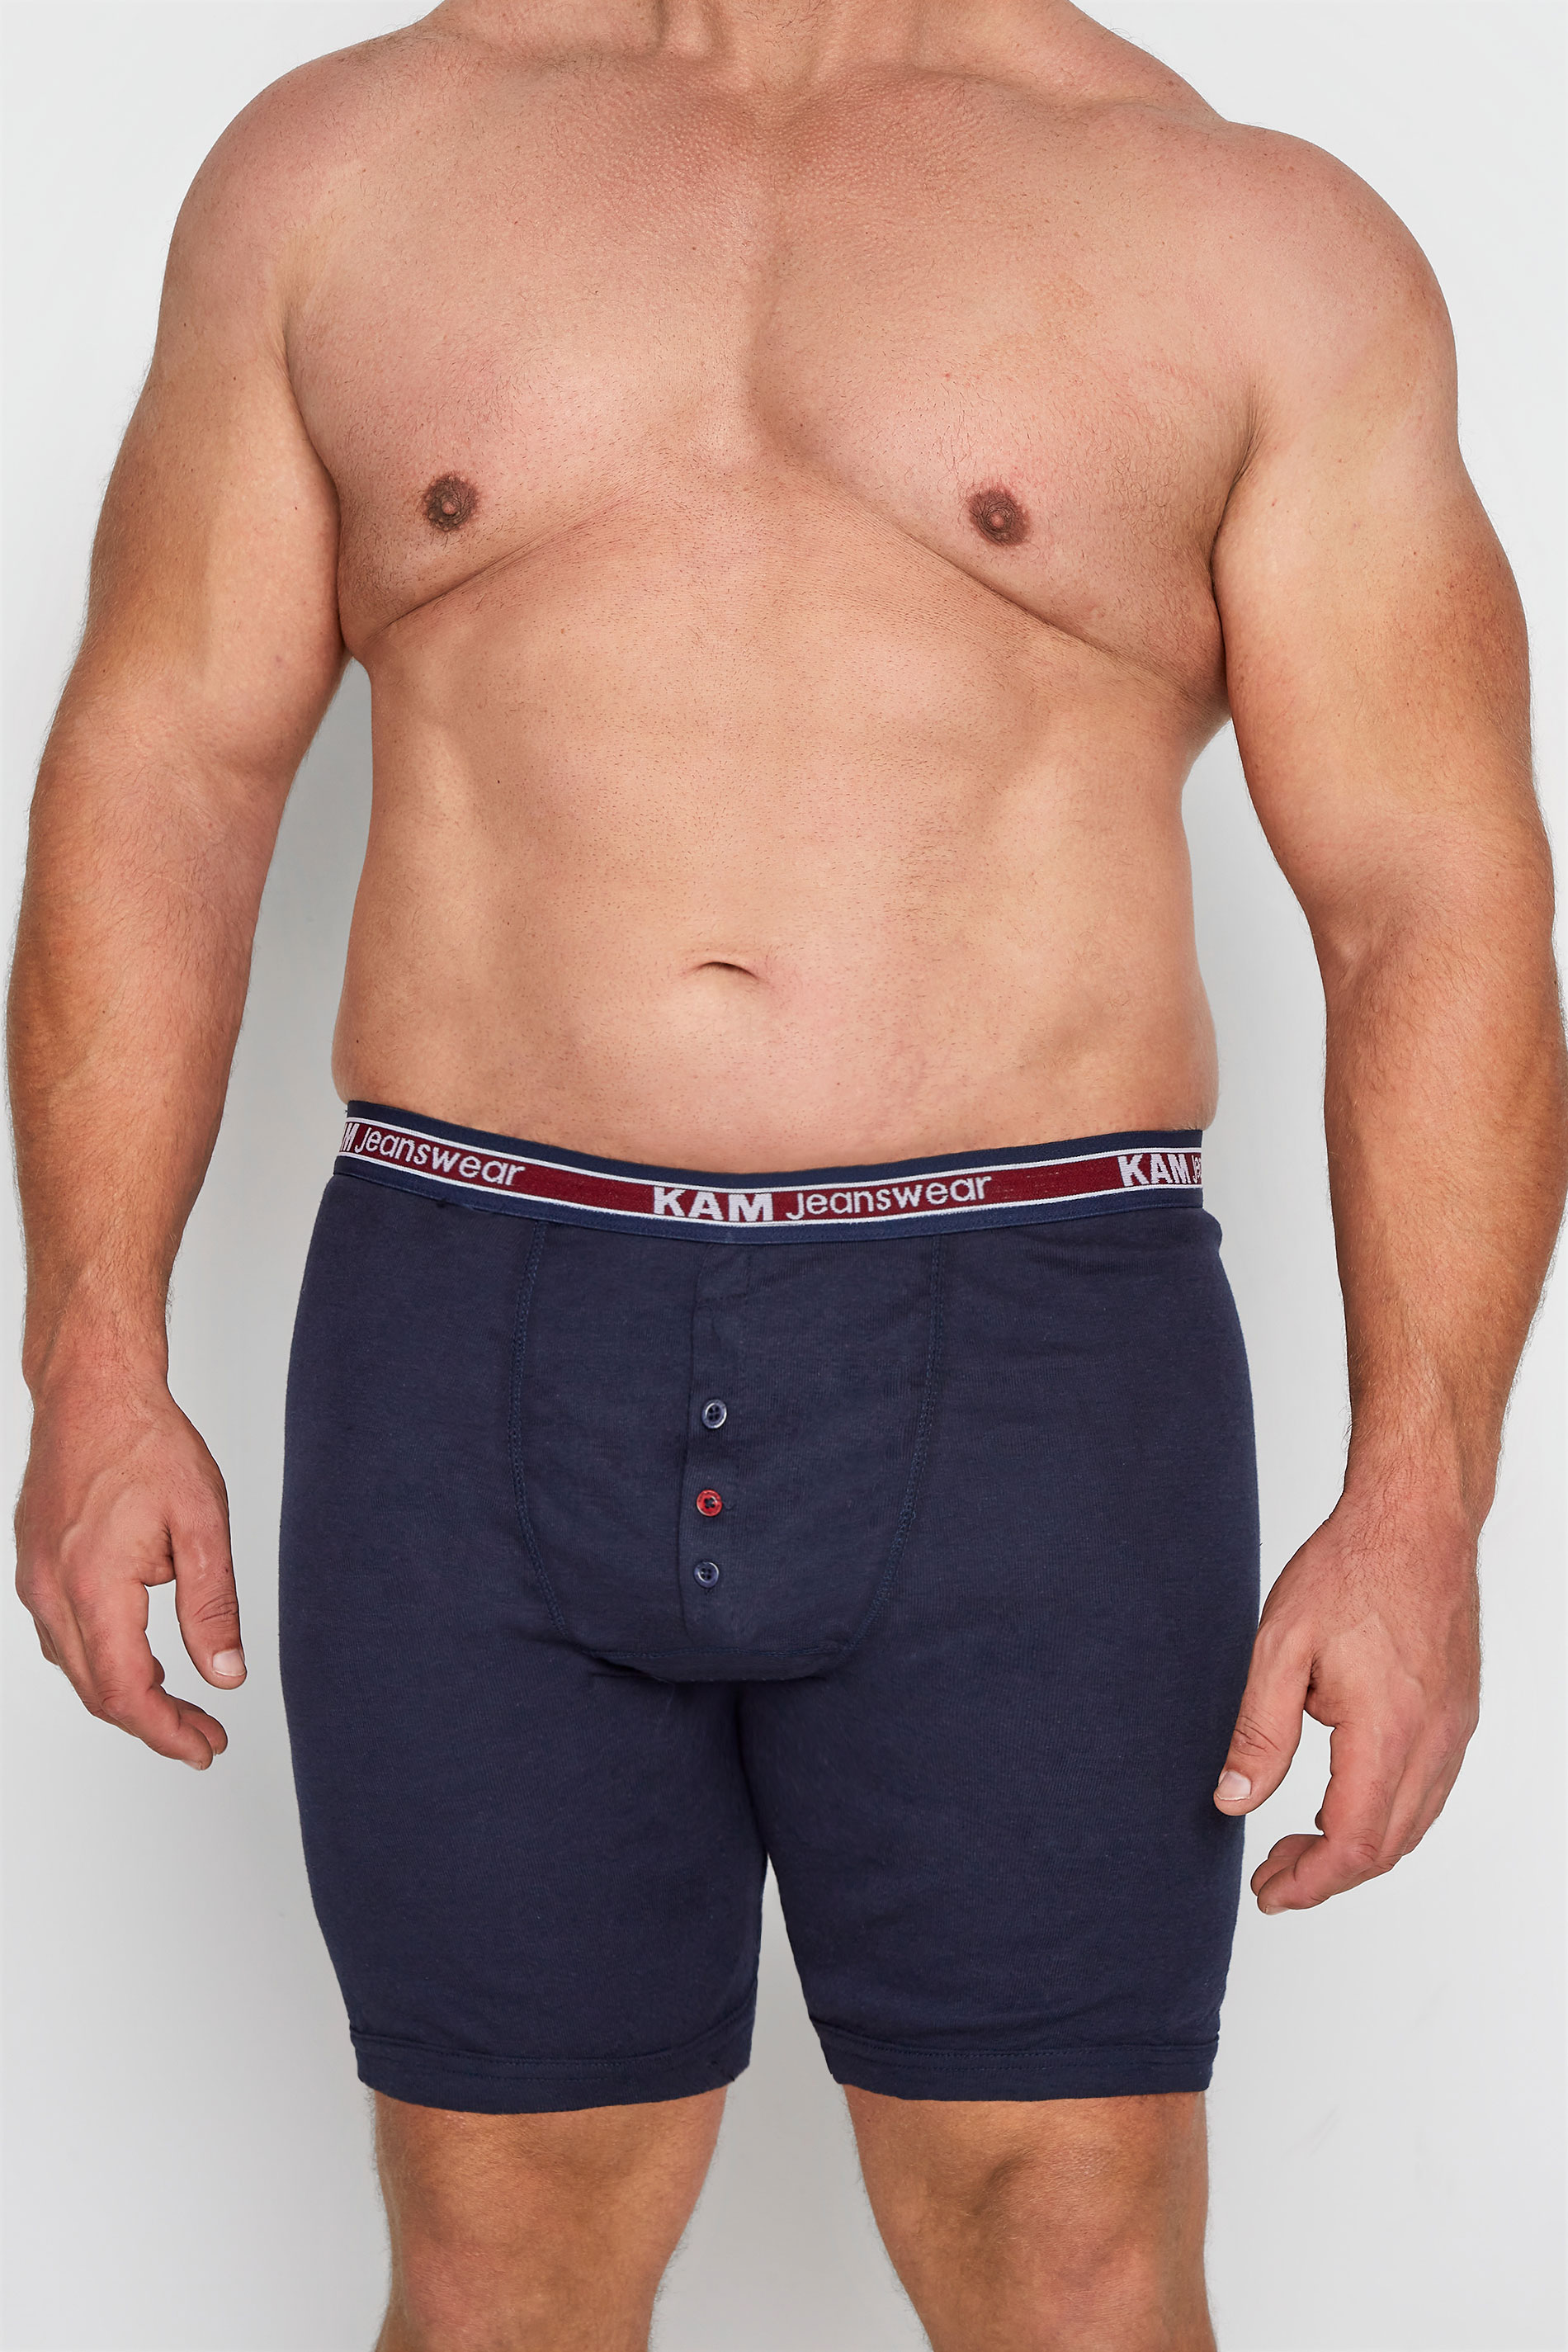 KAM 3 PACK Navy Blue & Grey Assorted Boxers 1